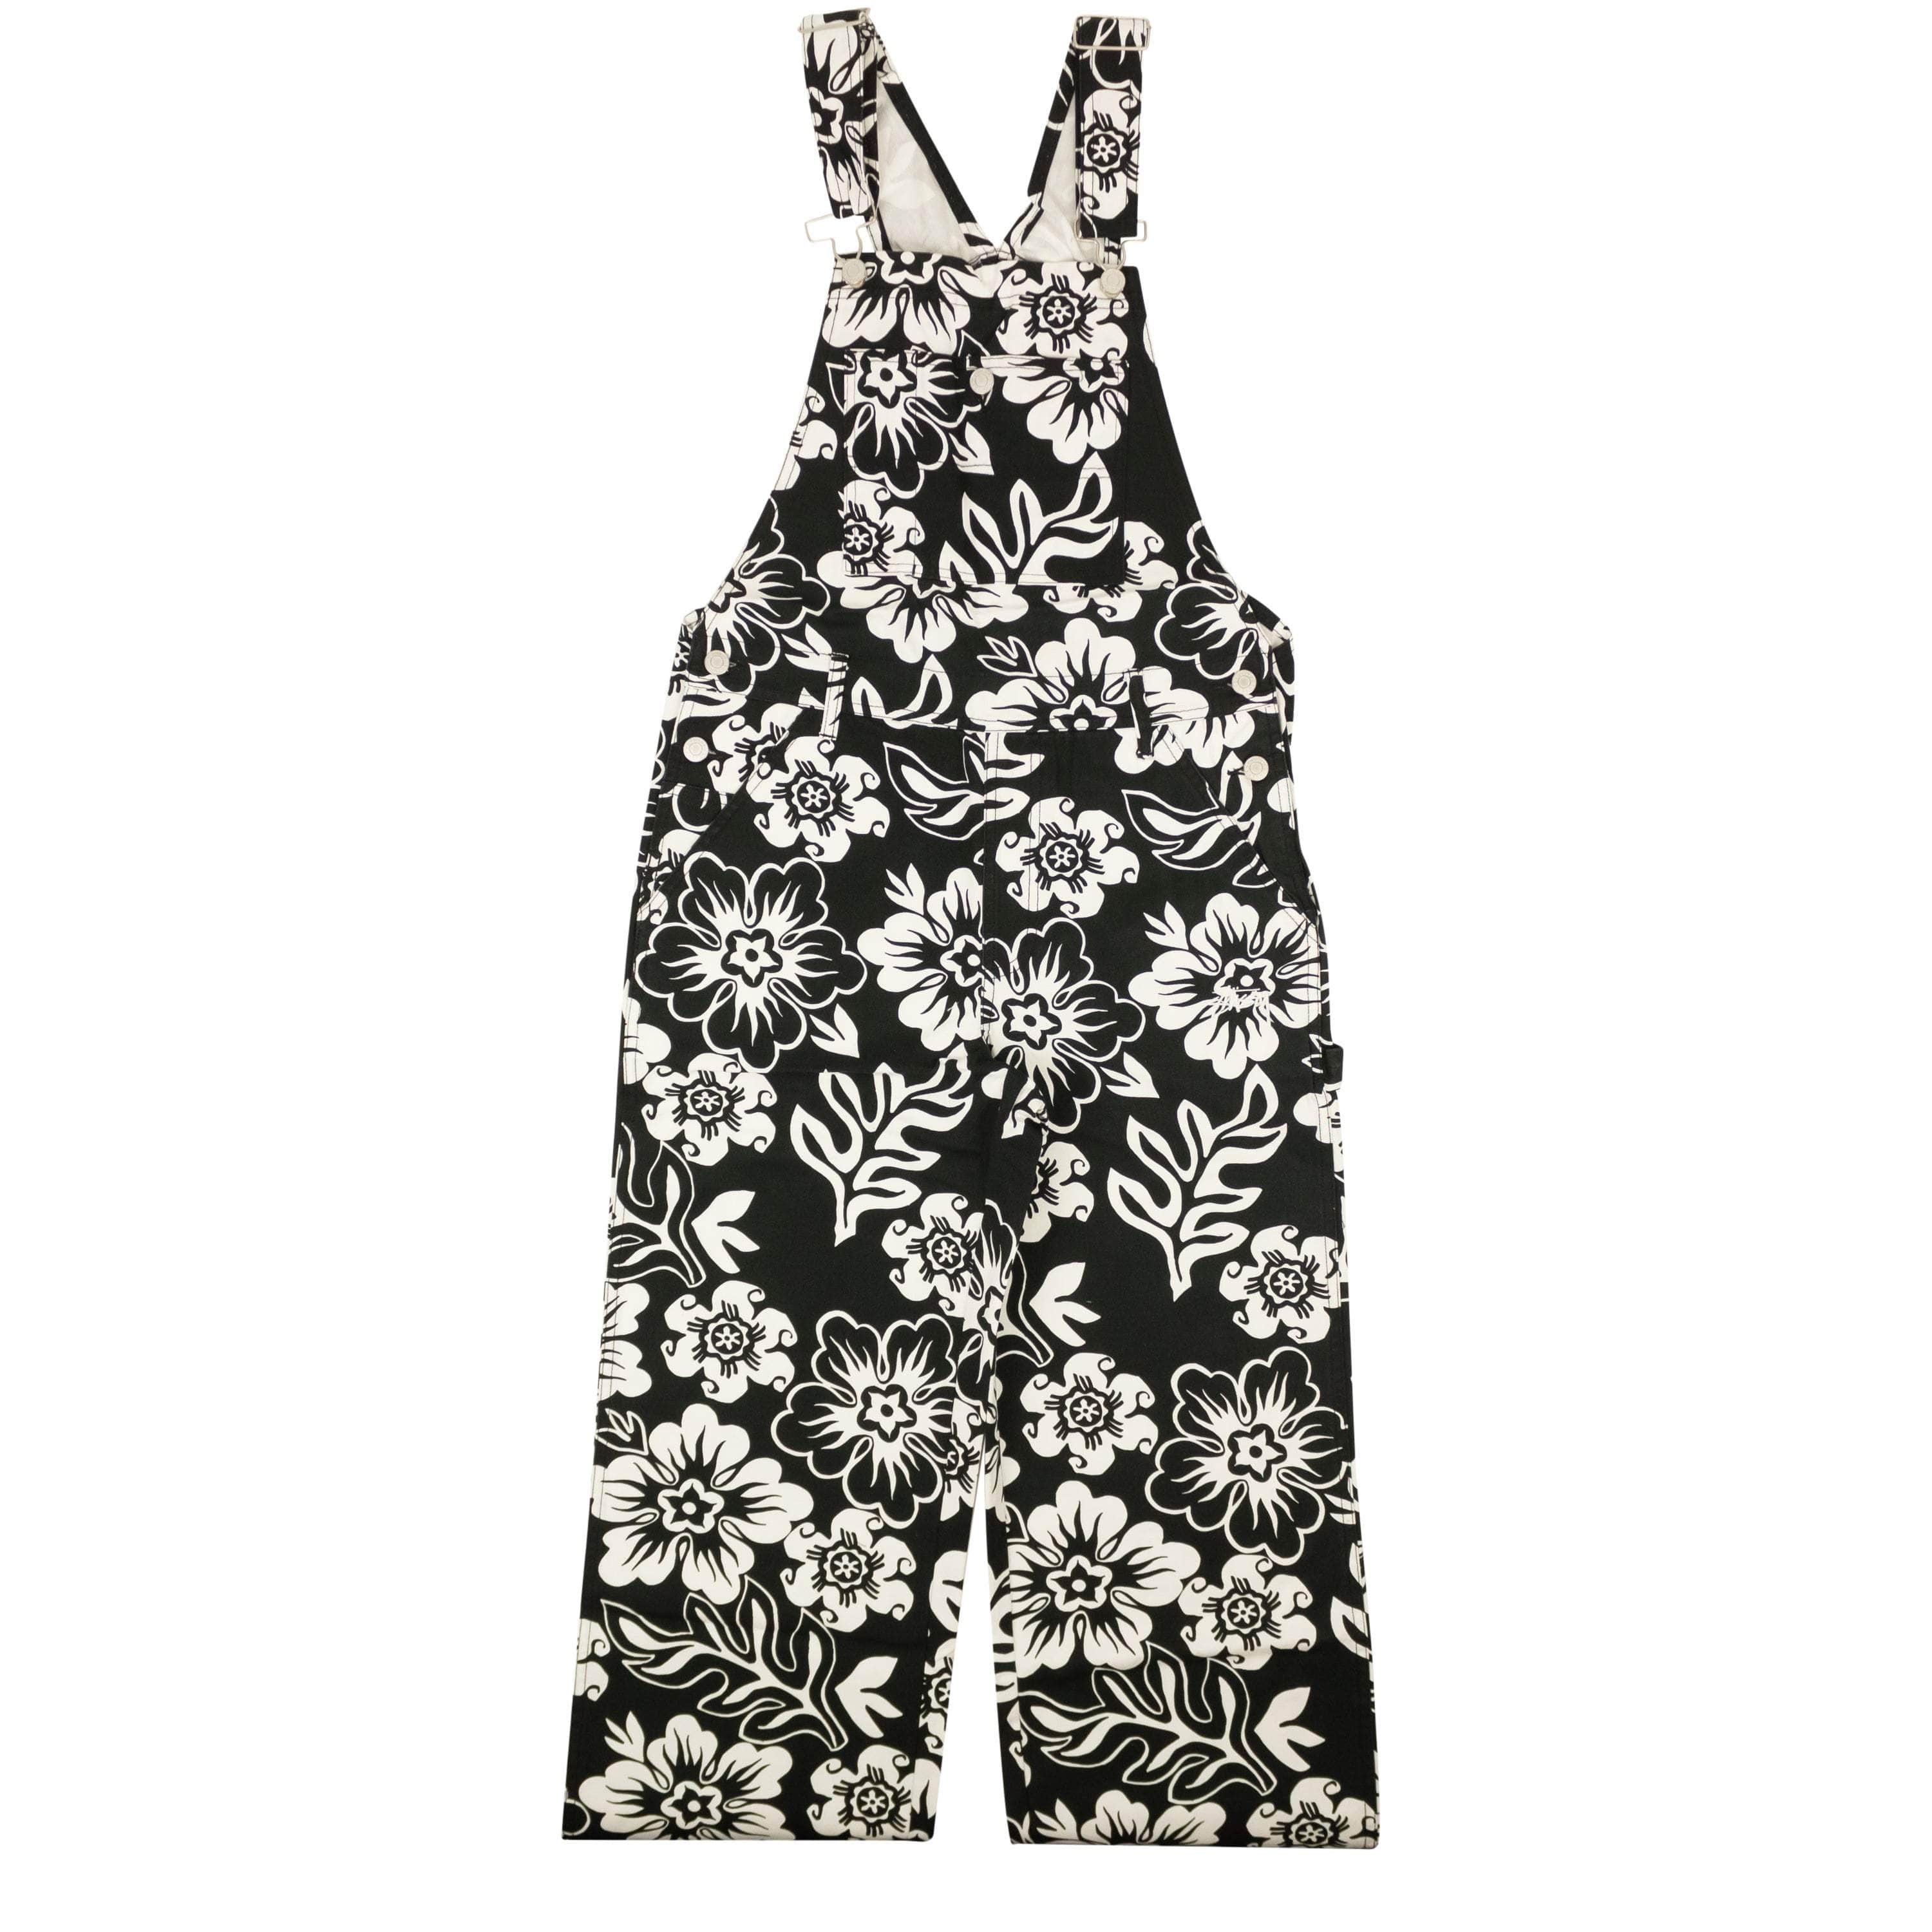 Stussy channelenable-all, chicmi, couponcollection, gender-womens, main-clothing, size-3, size-5, size-7, size-9, stussy, under-250, womens-jumpsuits-rompers Black Cotton Perri All Over Floral Print Overalls